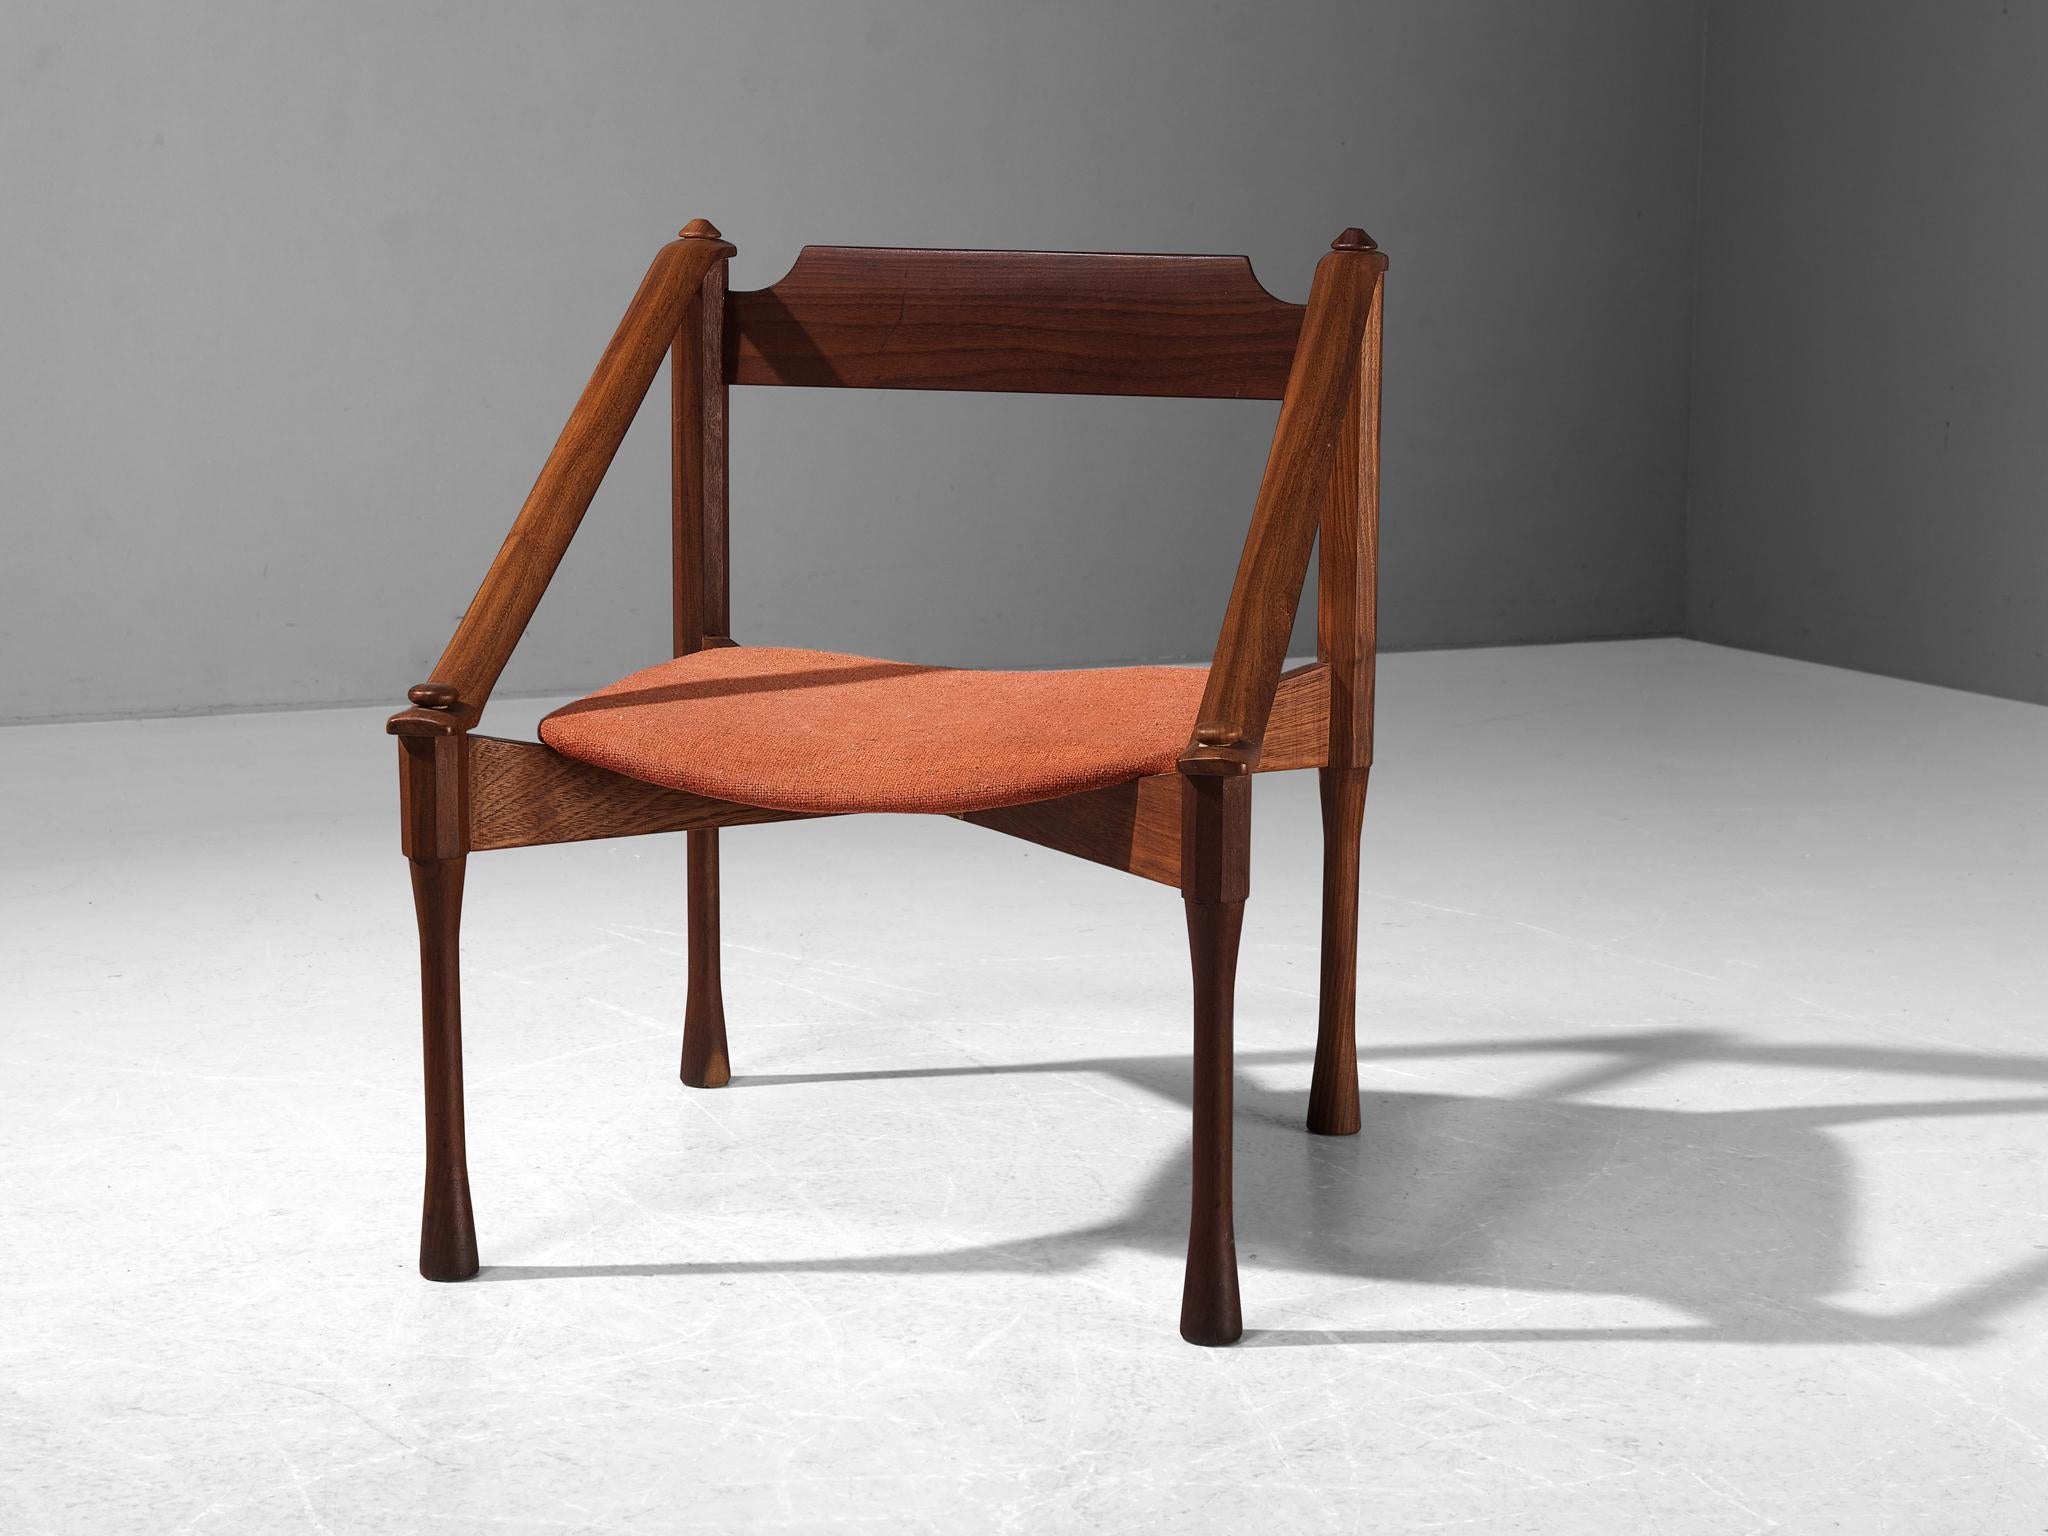 Giulio Moscatelli, armchair, teak, fabric, Italy, ca. 1950

This armchair by Giulio Moscatelli is distinctive in its execution. The legs are beautifully sculpted, showing concave carvings. The diagonal placed armrests give a sense of dynamism. Pure,